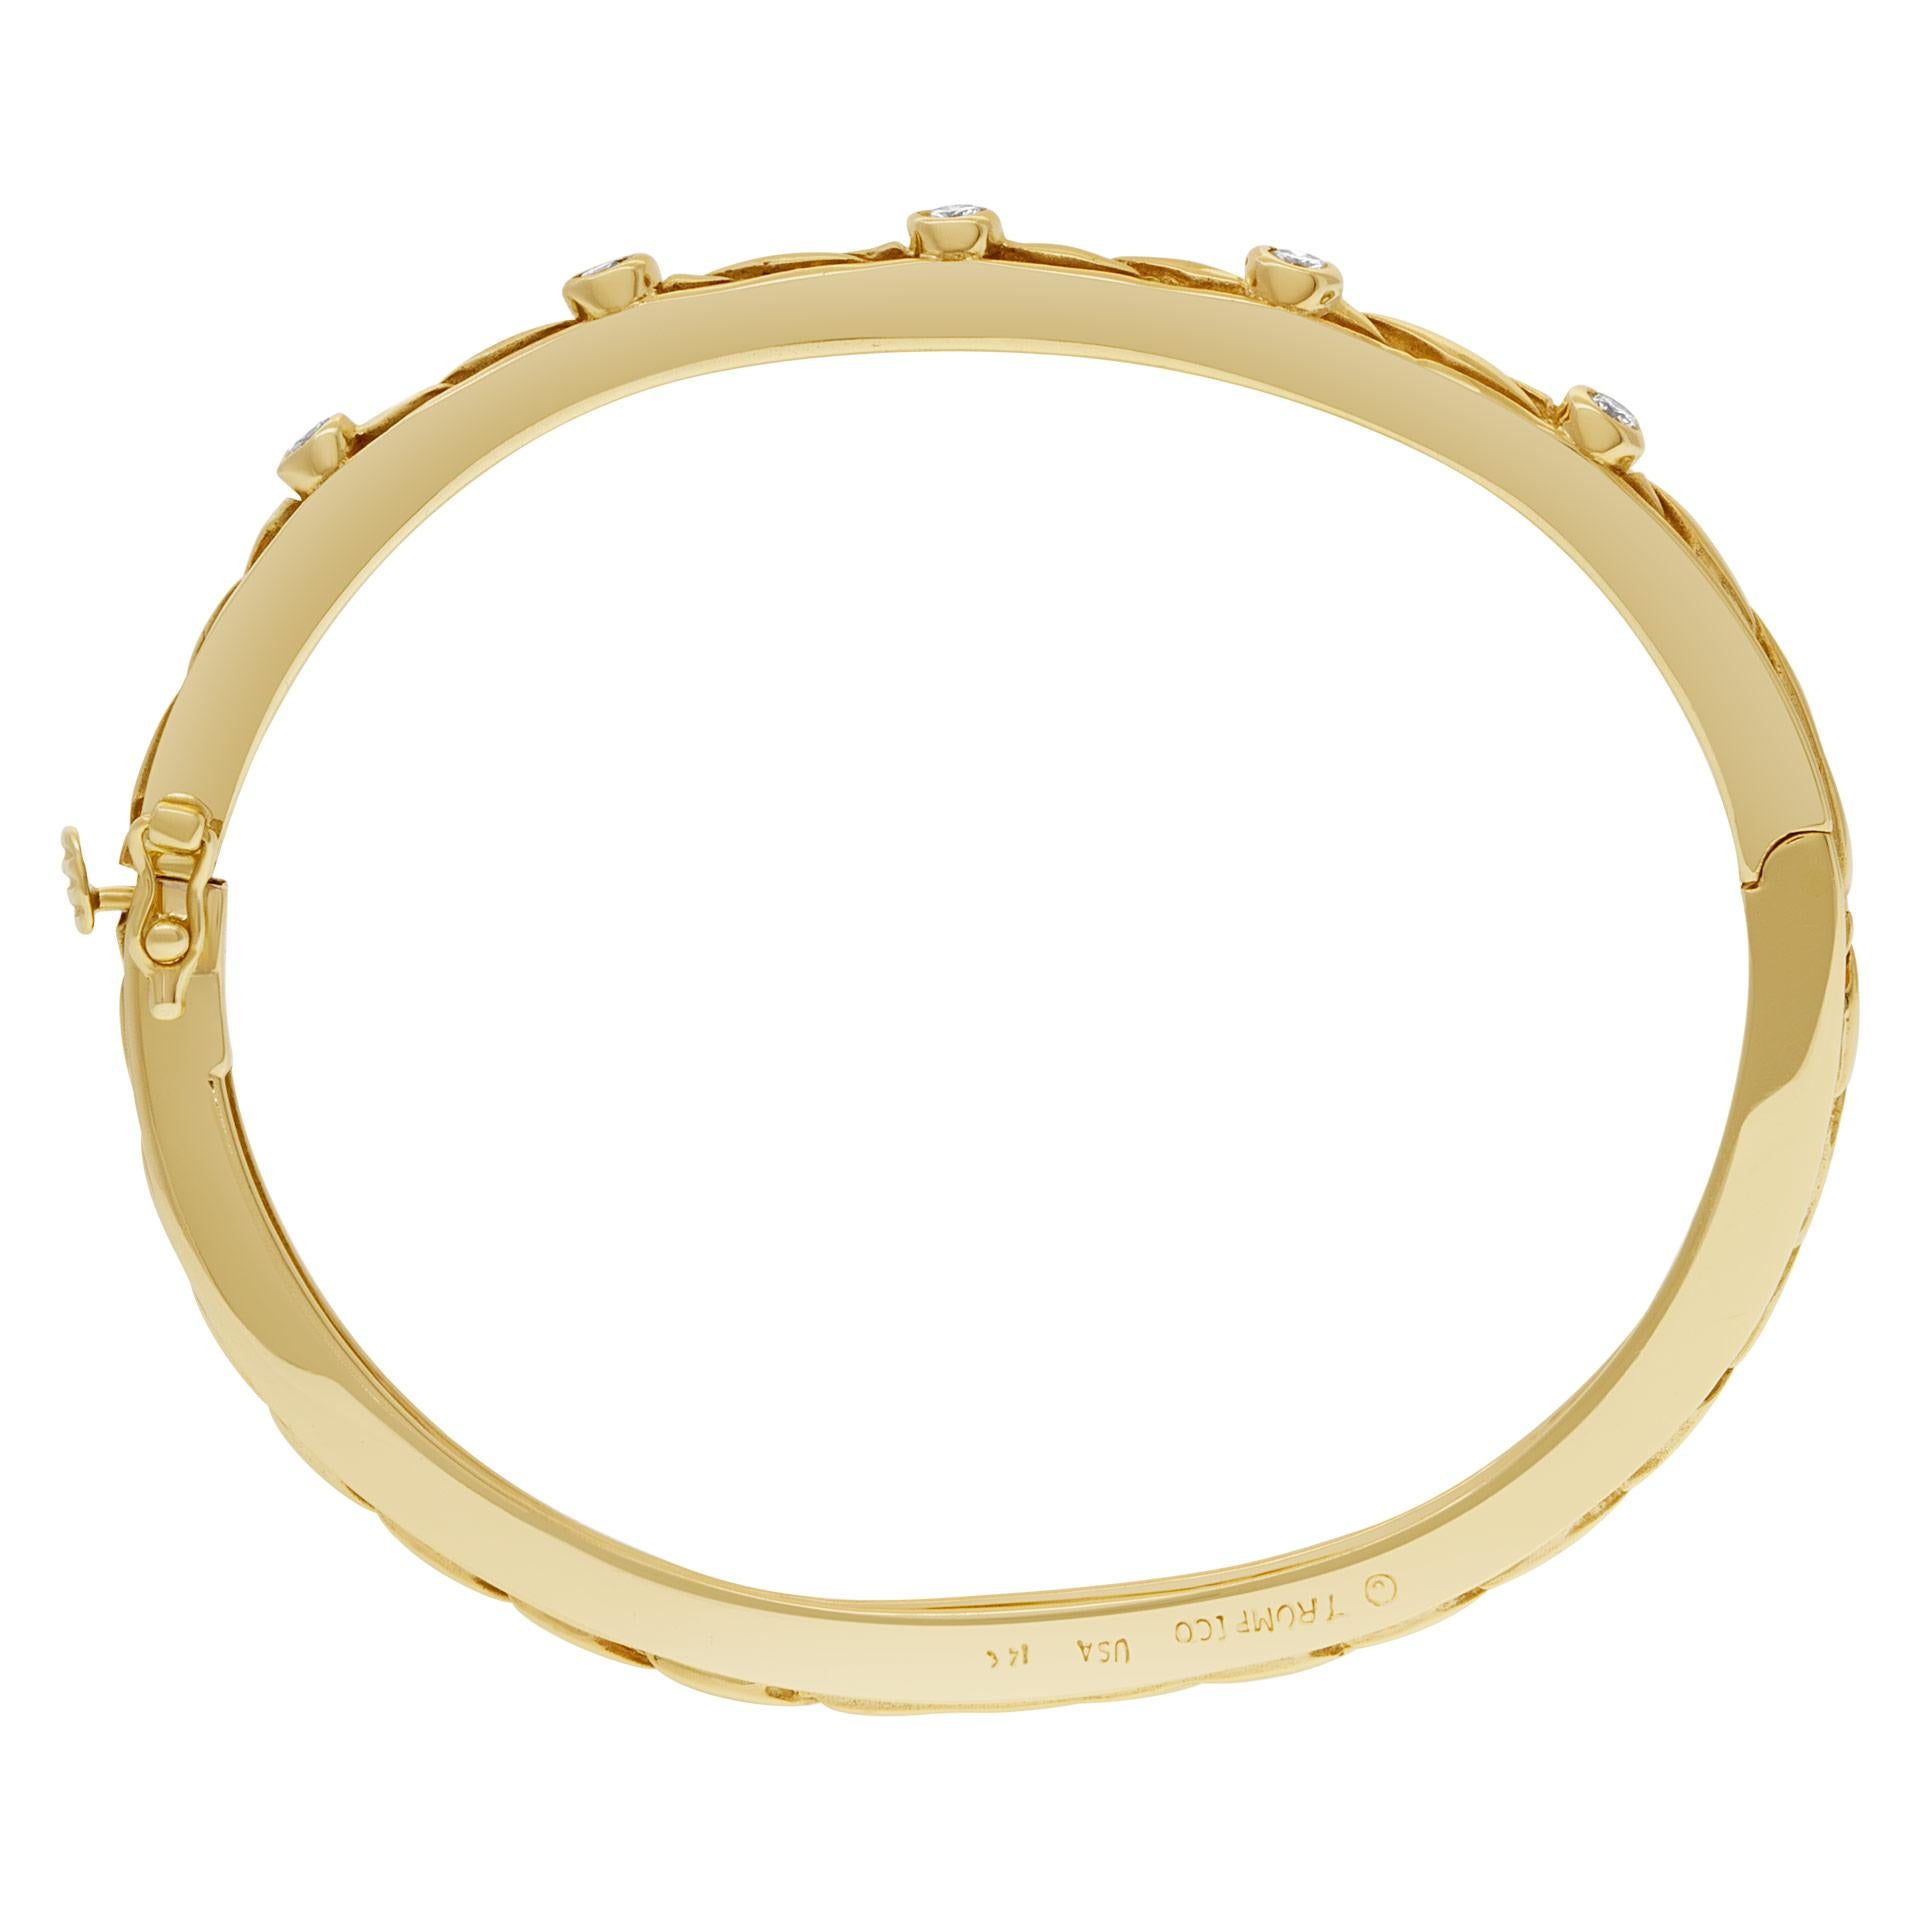 Bangle Bracelet with 5 Swirls in 14k Yellow Gold and Diamonds For Sale 1